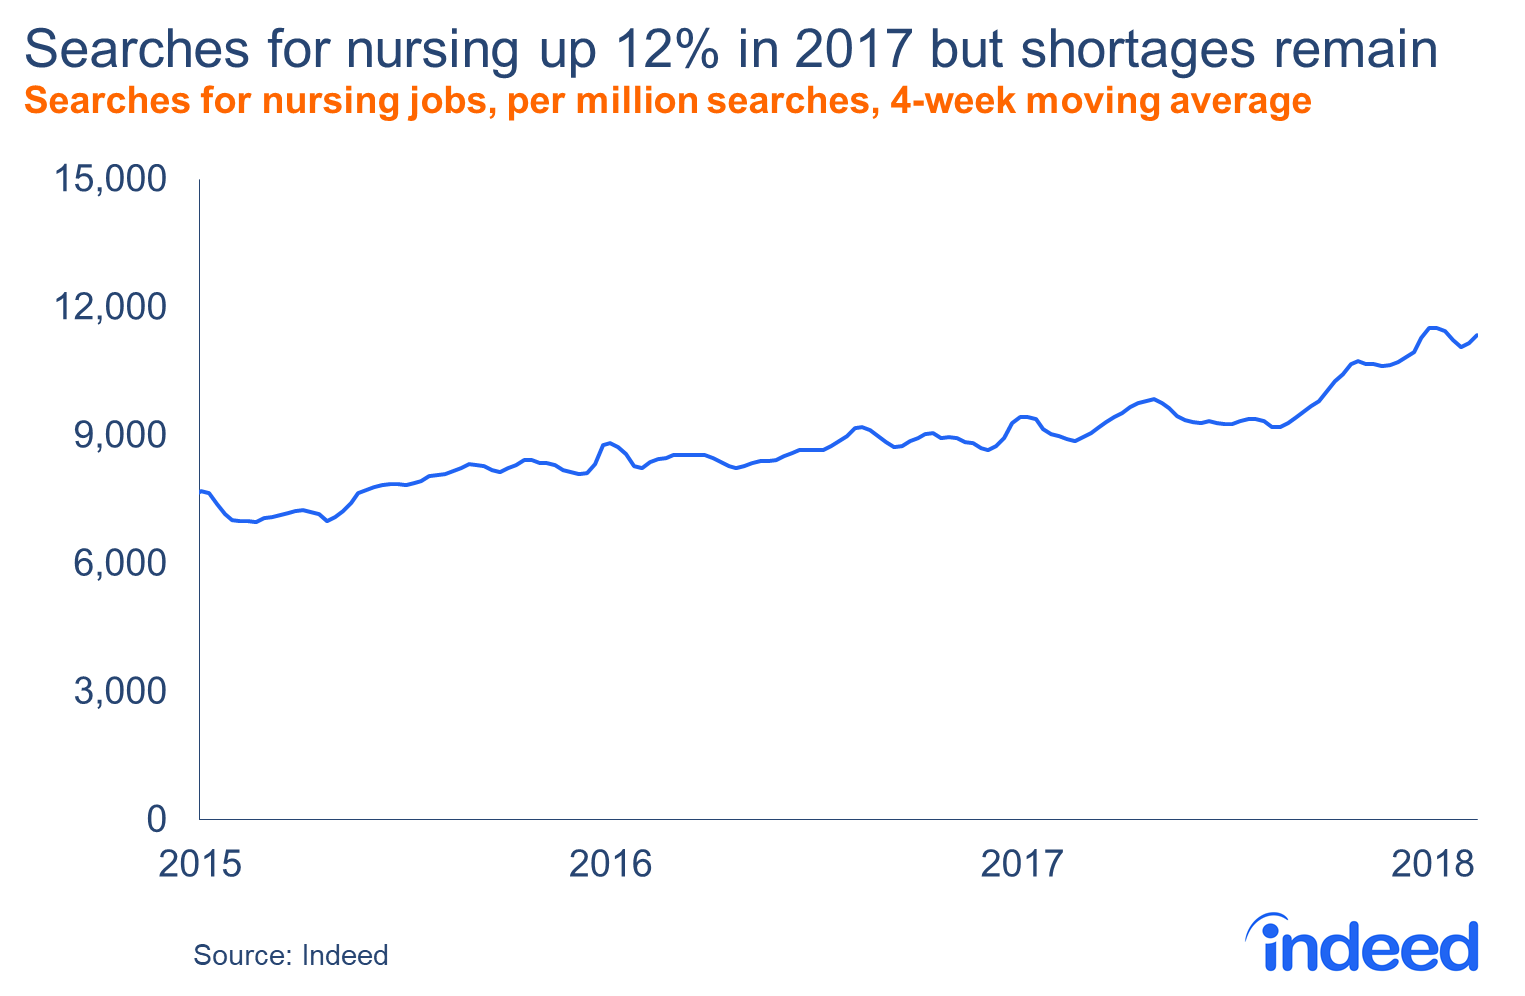 Searches for nursing up 12% in 2017 but shortages remain